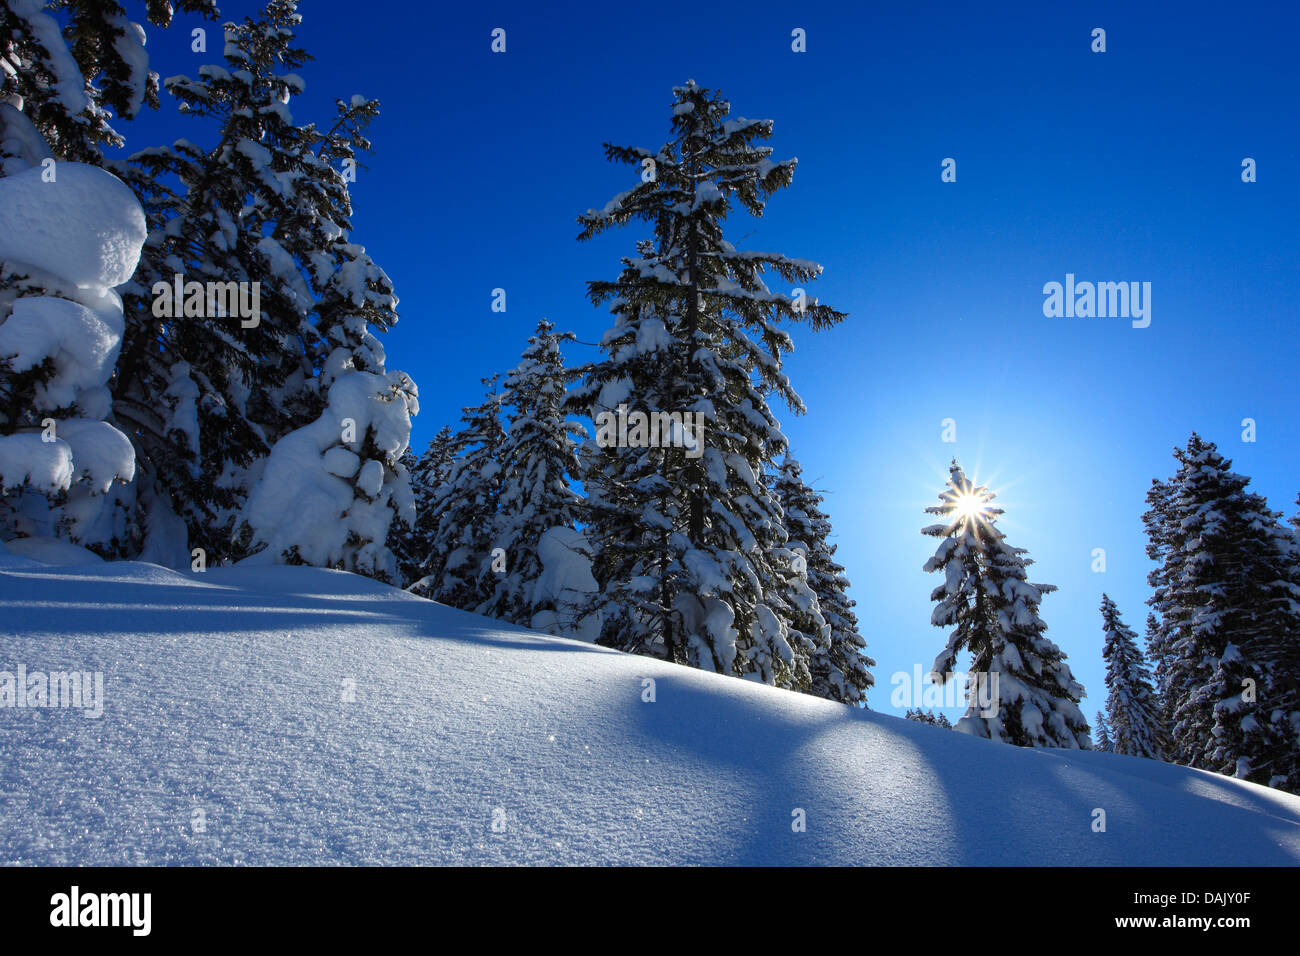 Norway spruce (Picea abies), sun behind snowy spruces, Switzerland Stock Photo